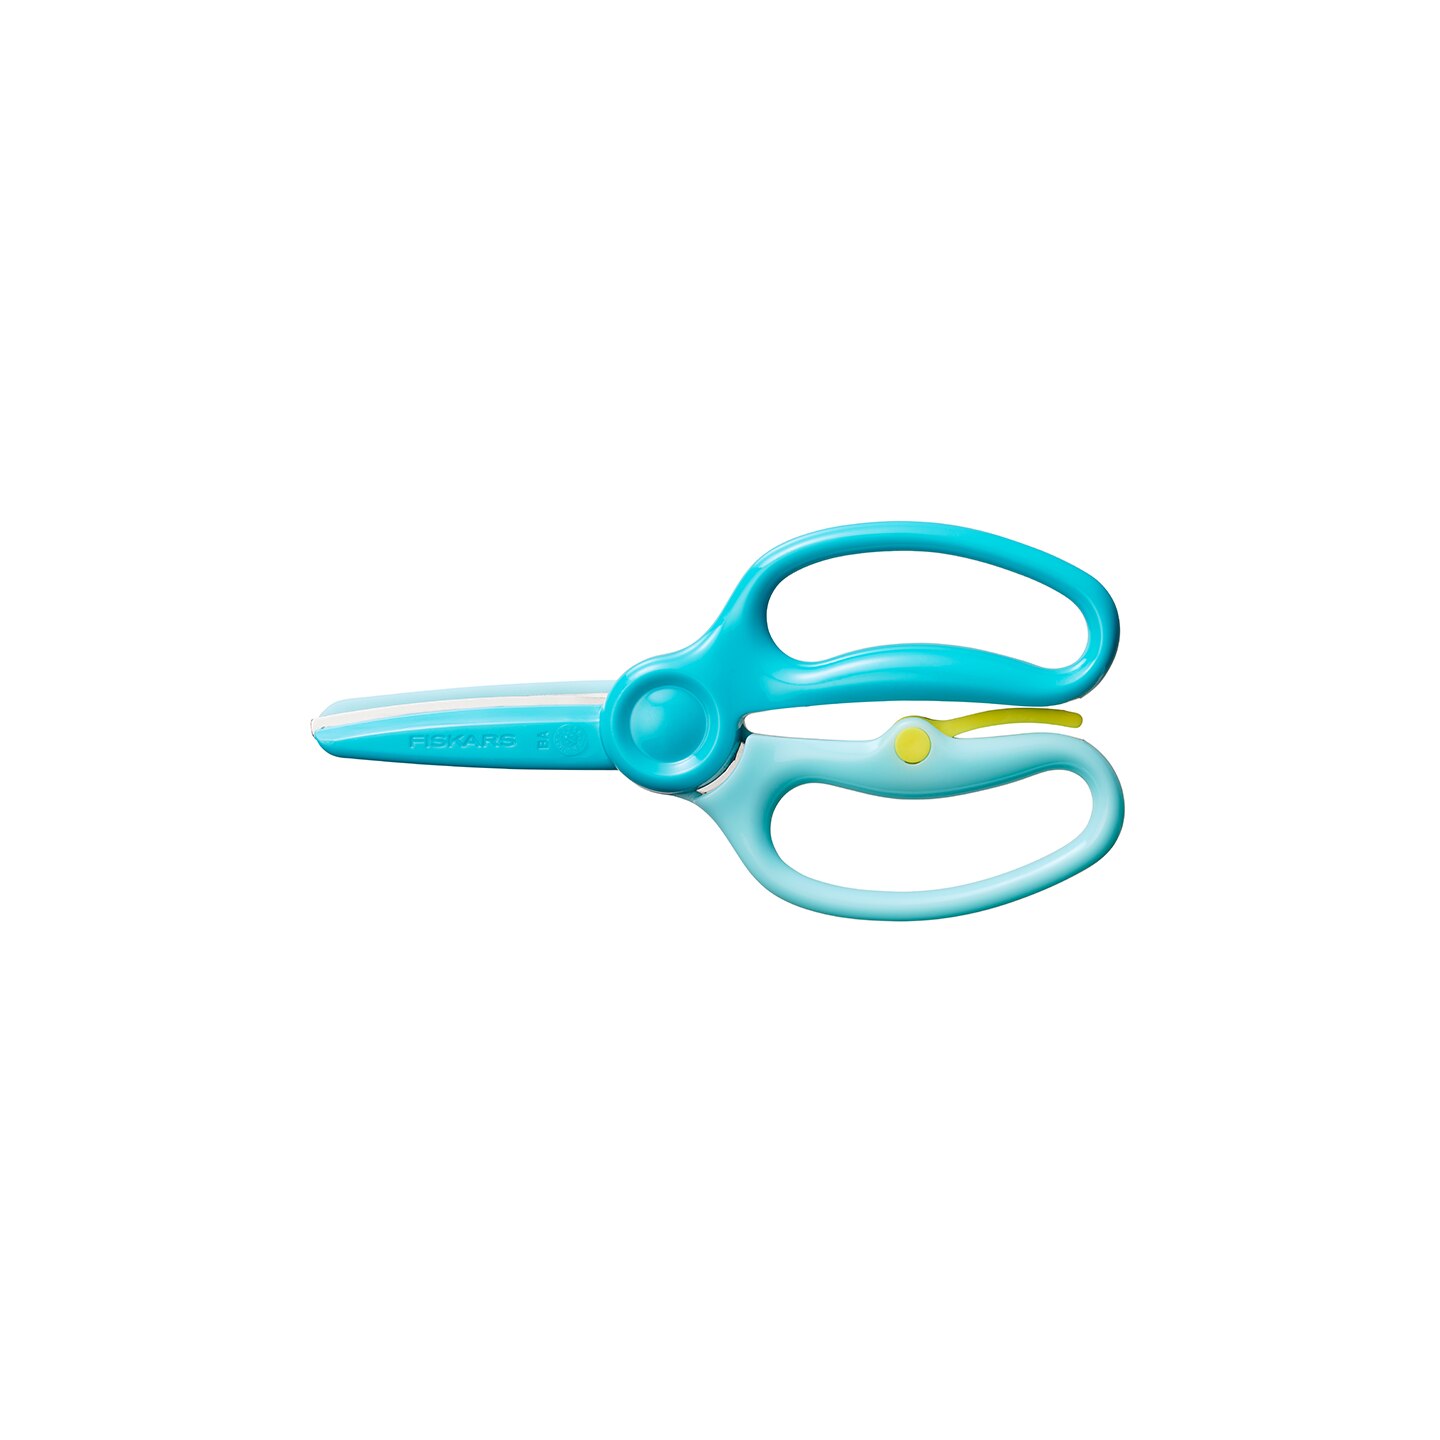 Fiskars Training Scissors for Kids 3+ with Easy Grip (3-Pack) - Toddler  Safety Scissors for School or Crafting - Back to School Supplies -  Turquoise